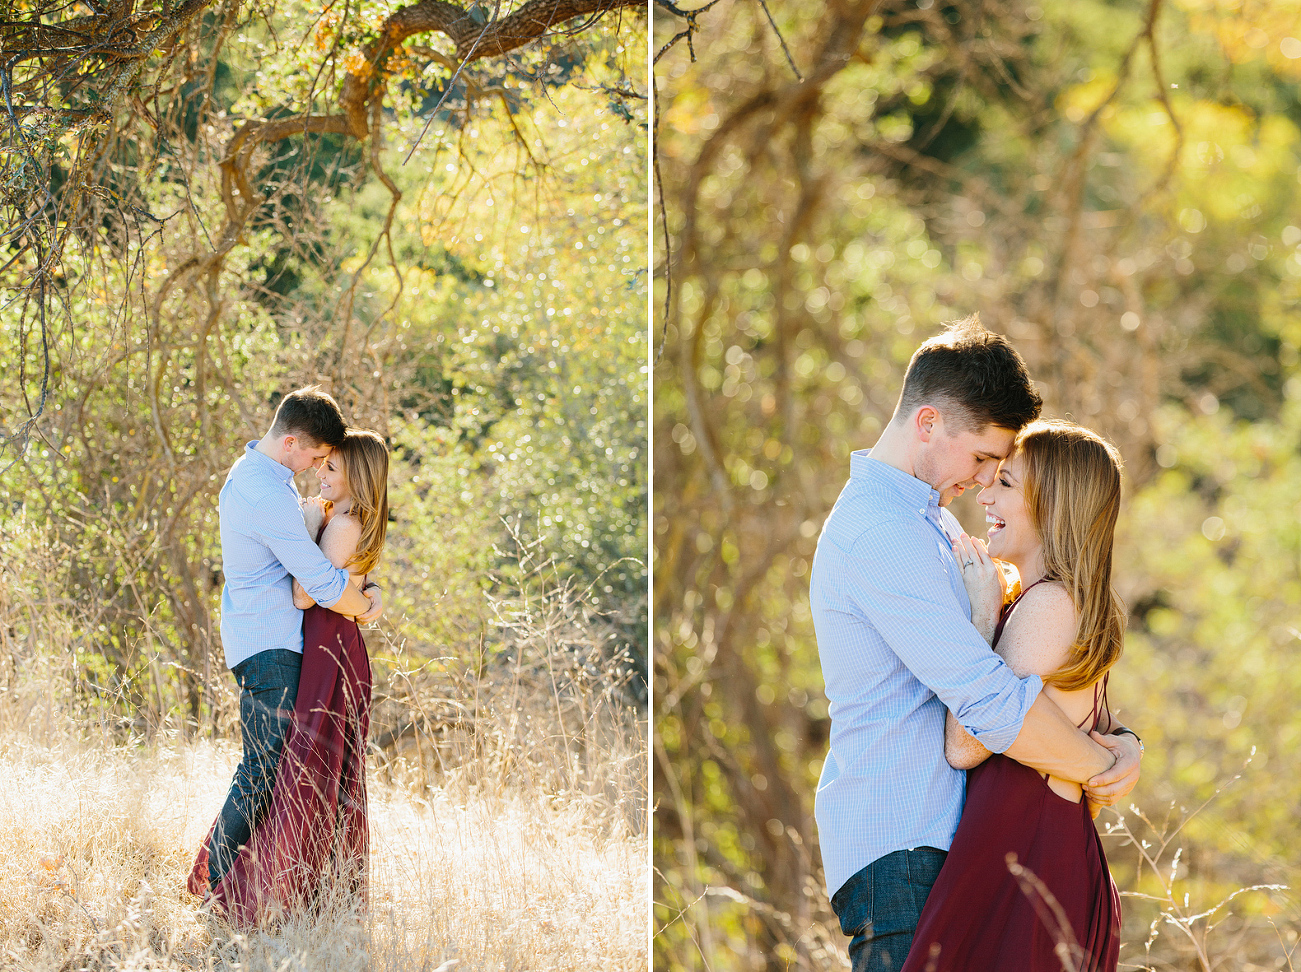 Cute photos of the couple standing together. 